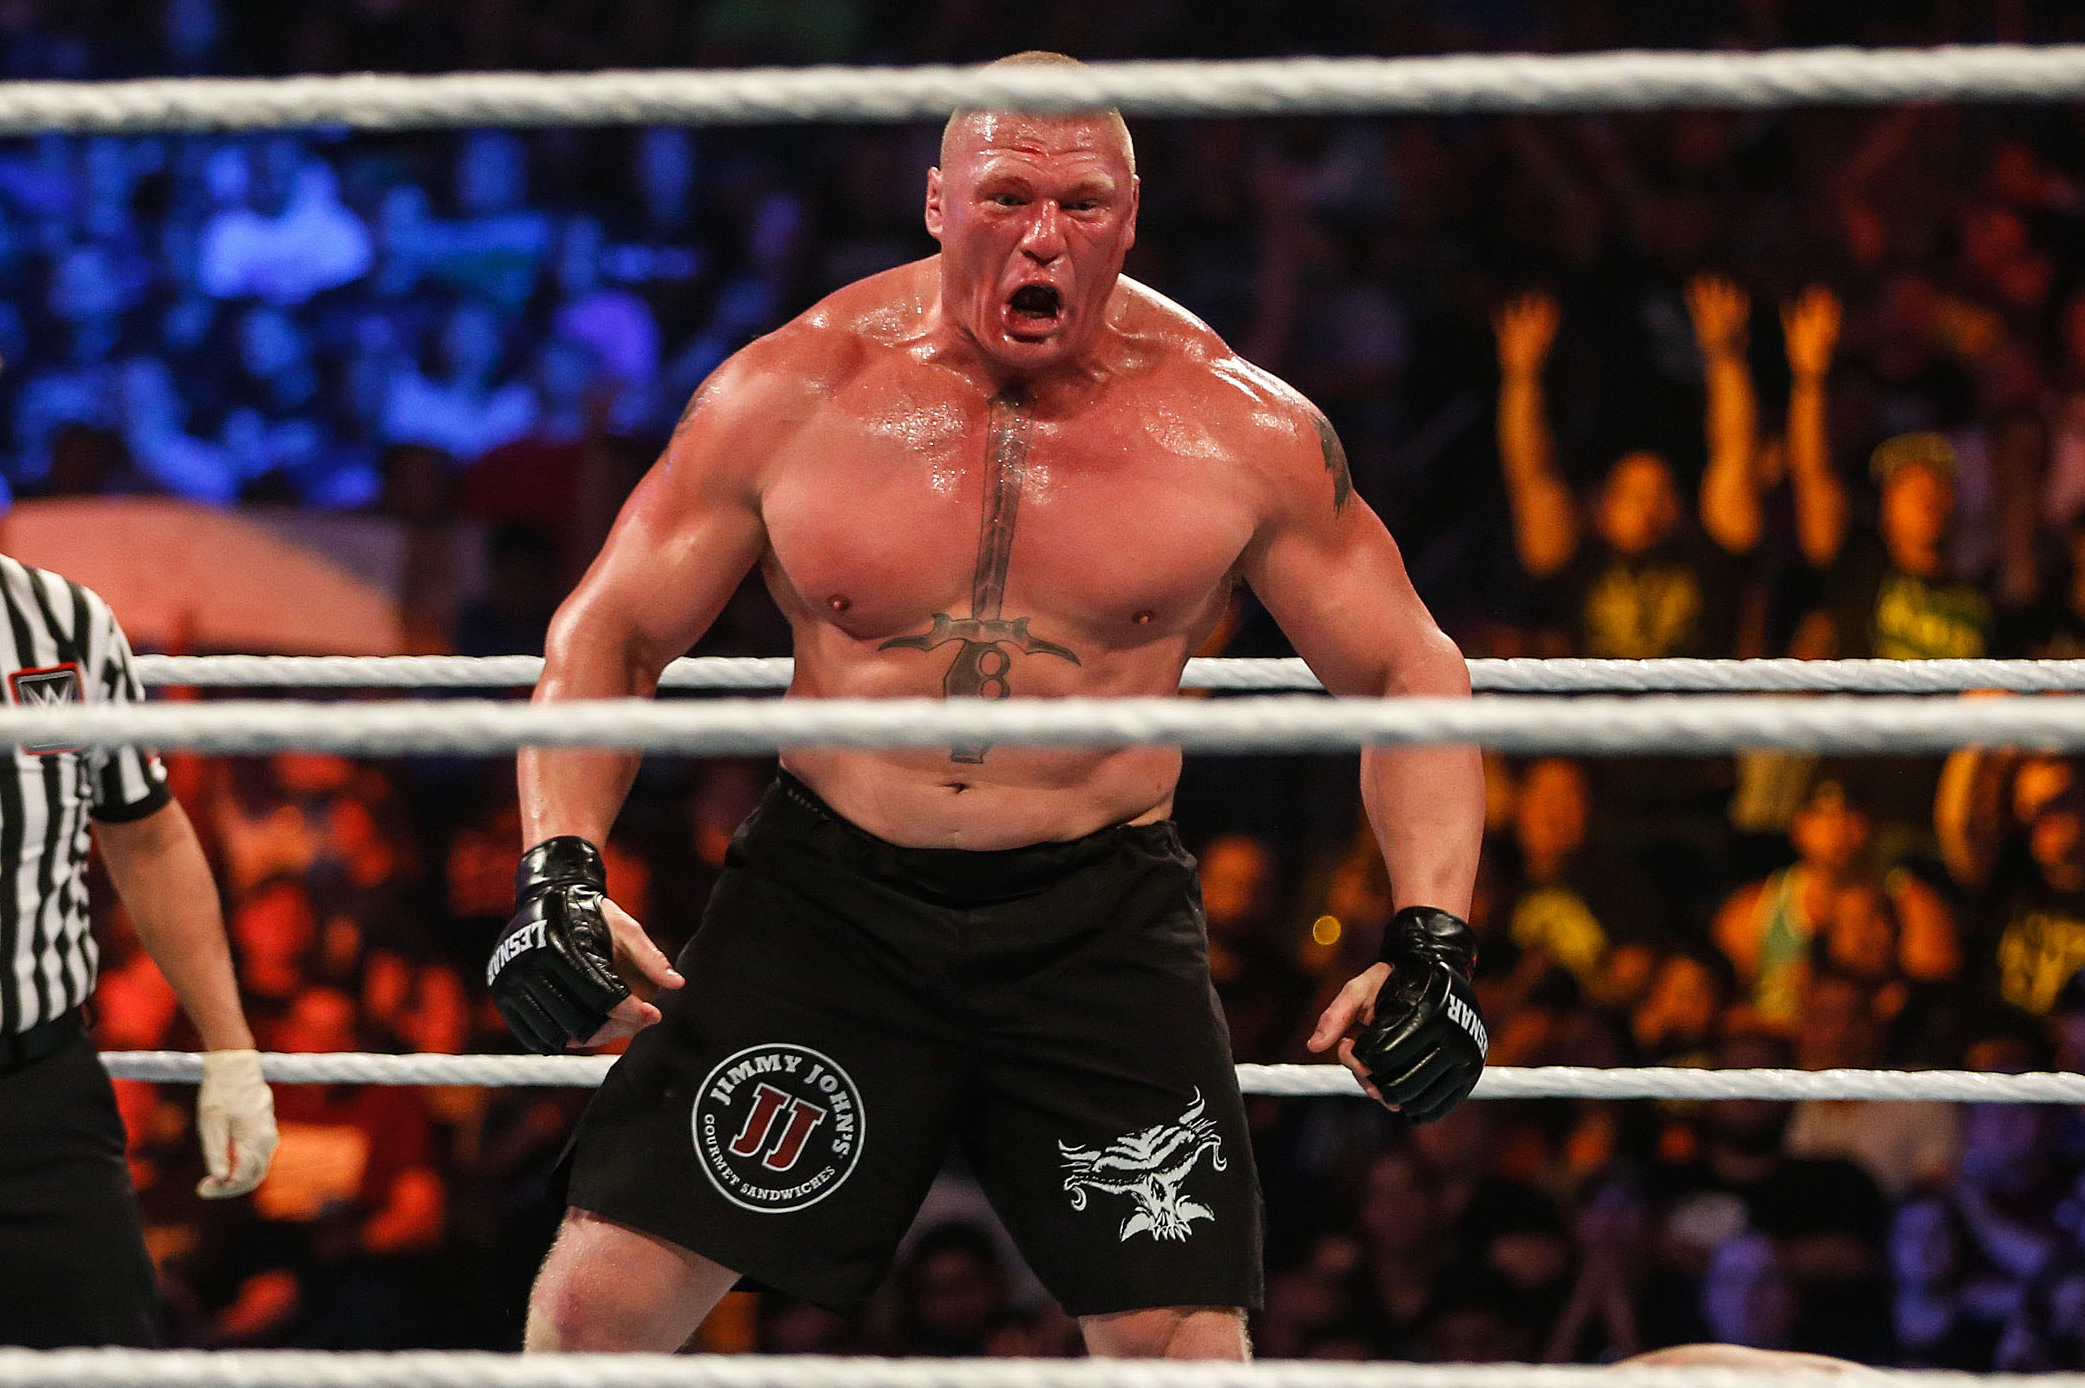 Plans Revealed For Brock Lesnar On Raw After Winning WWE Championship 2